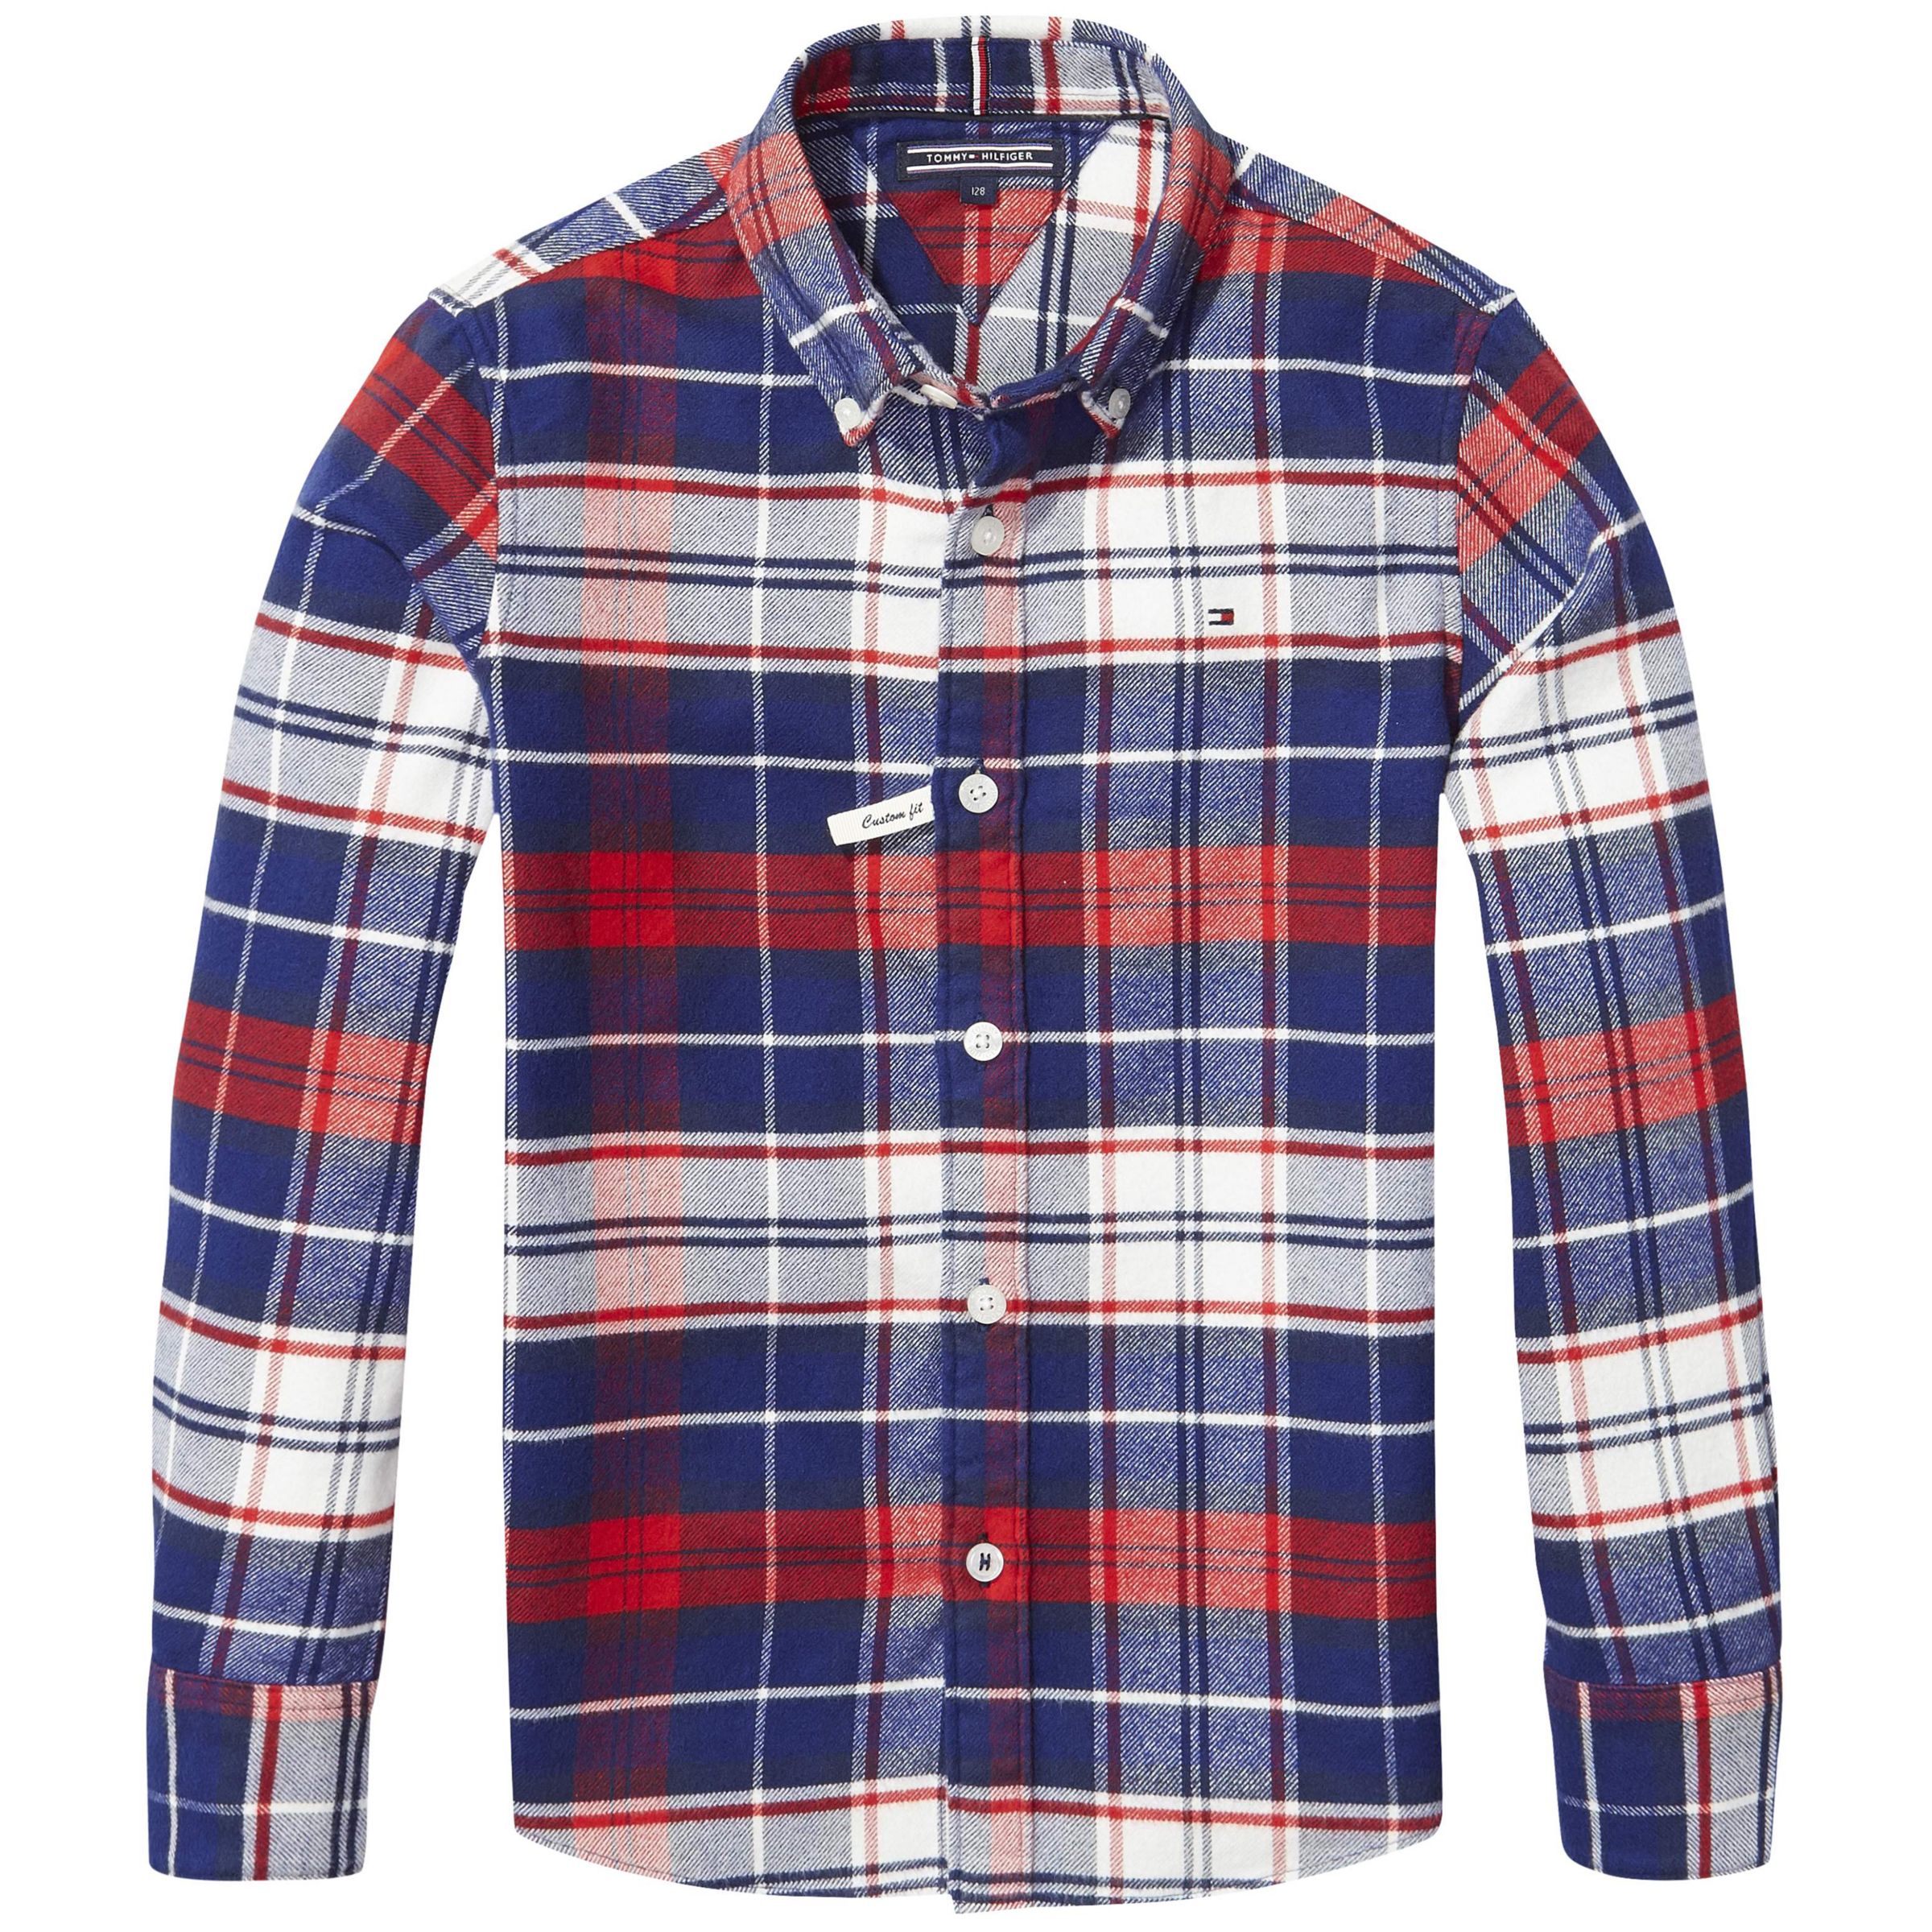 red tommy hilfiger shirt long sleeve